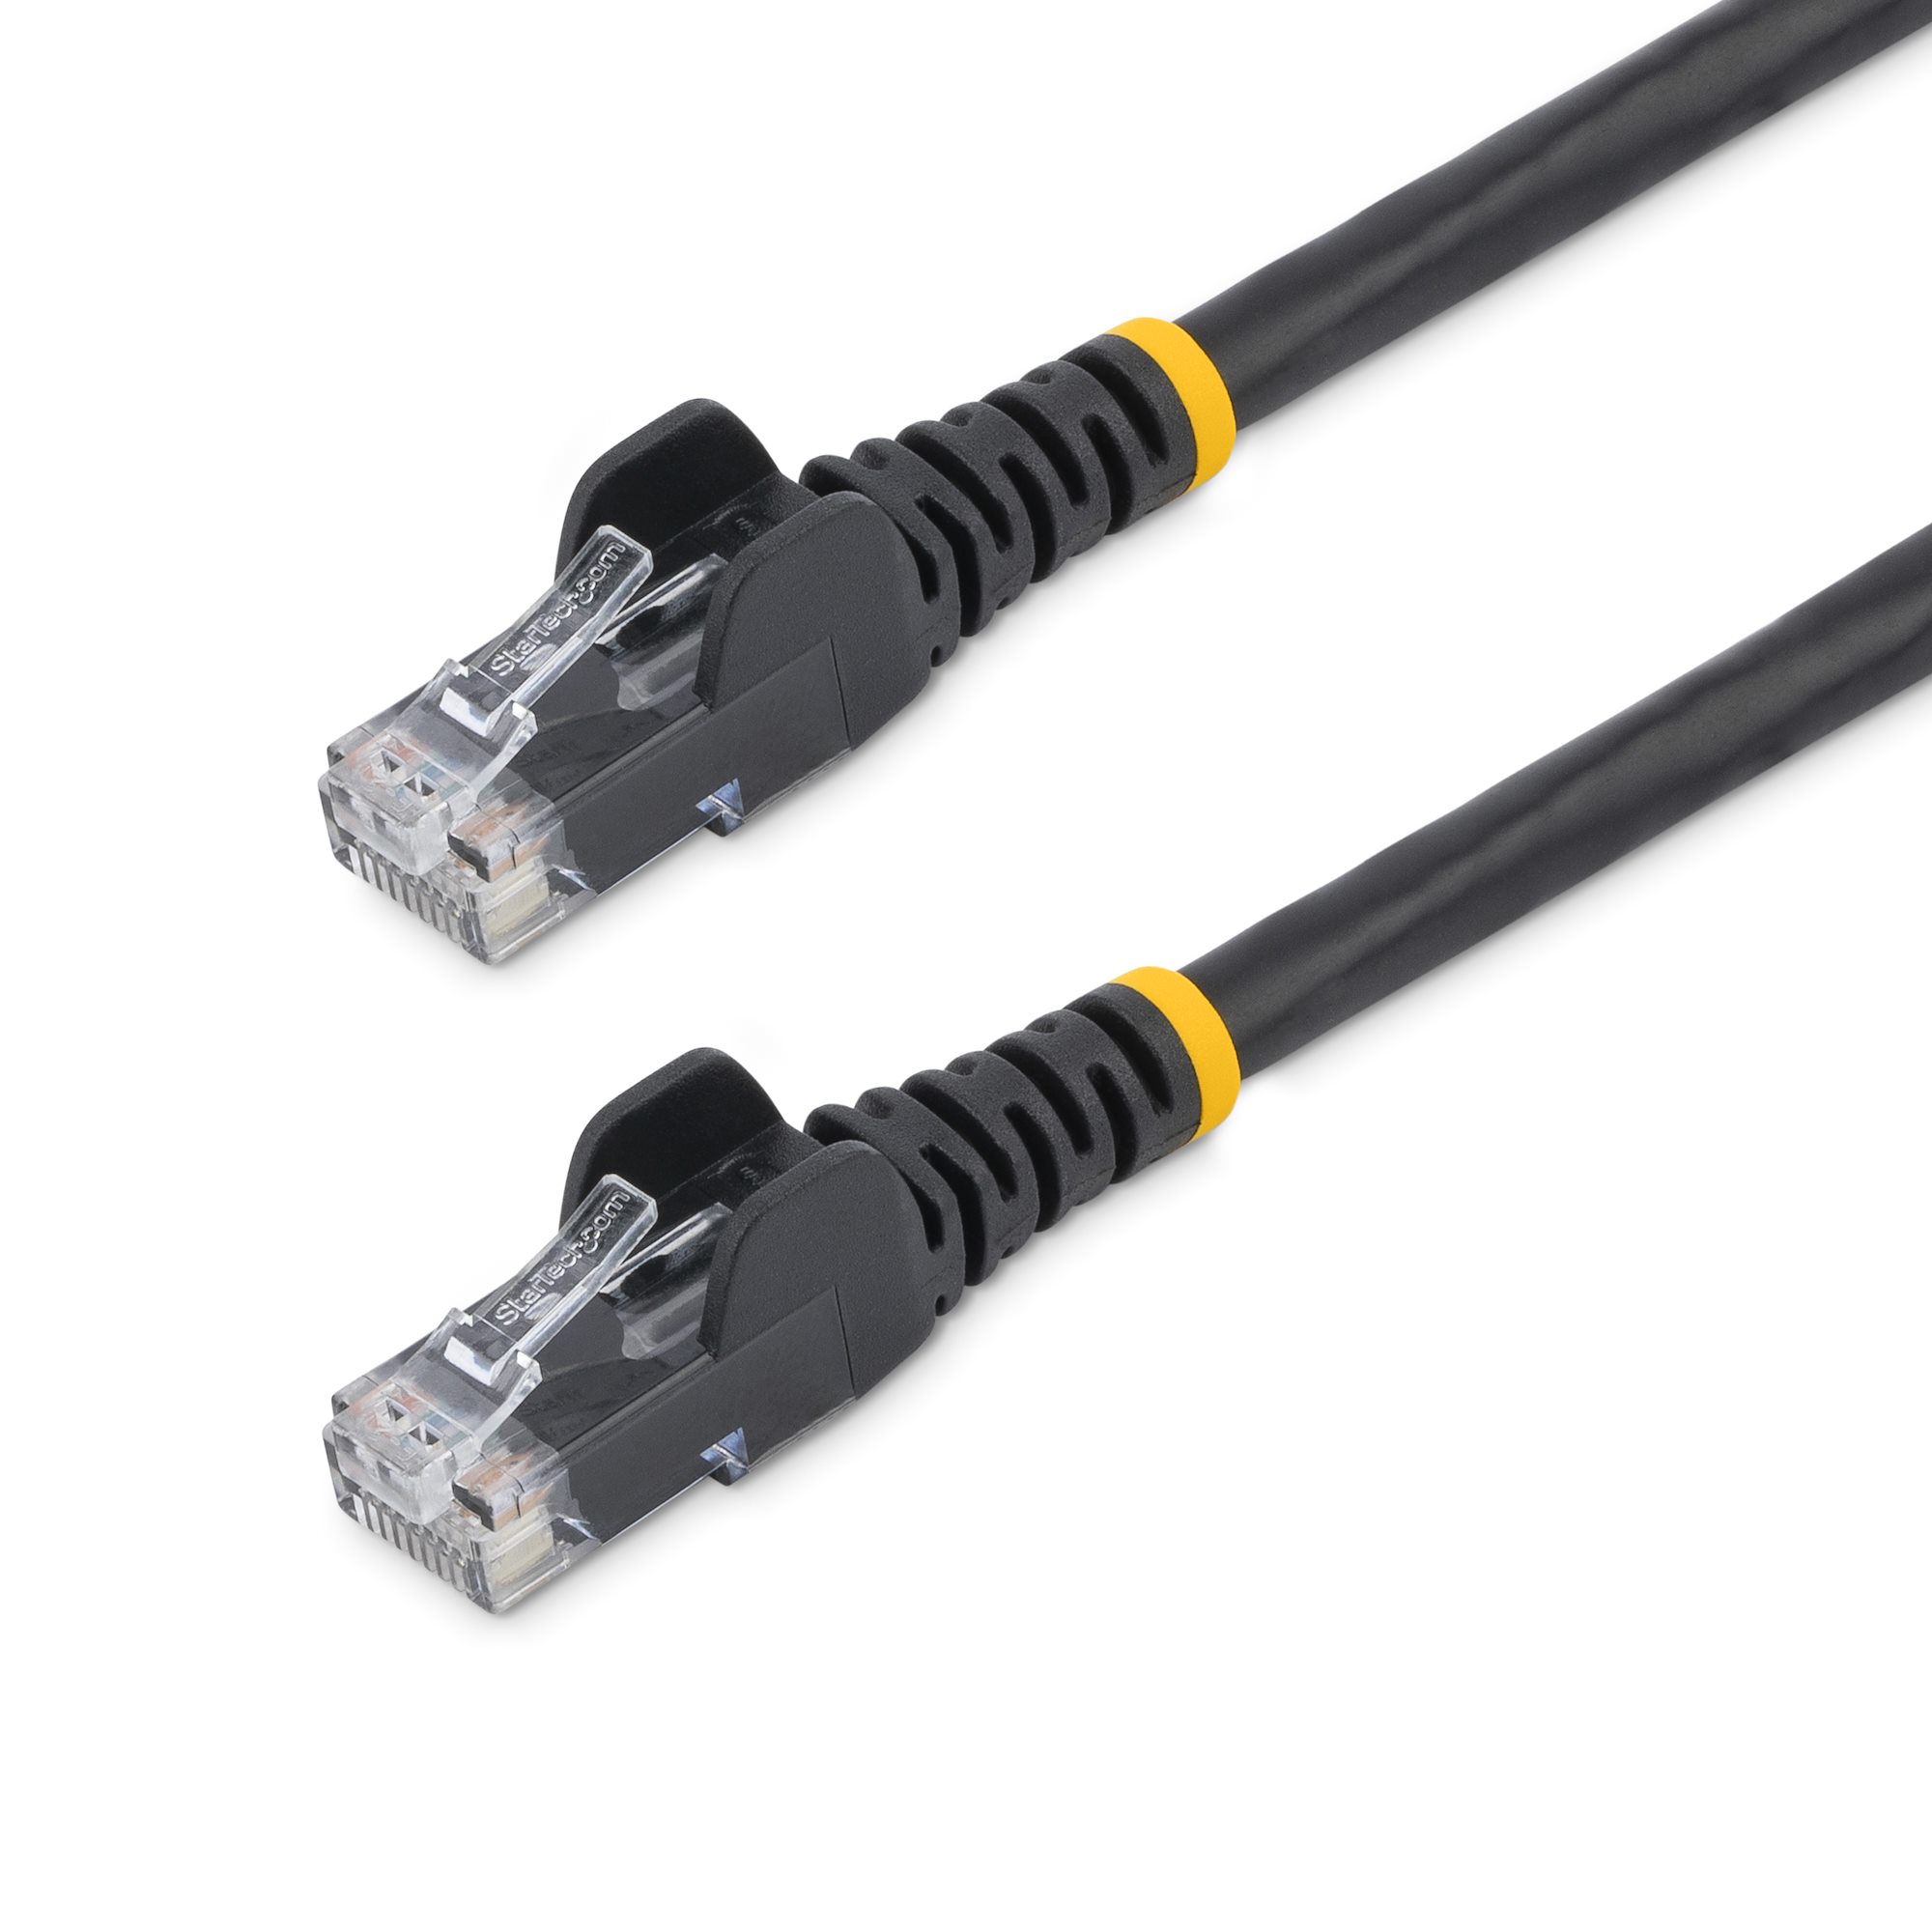 Cat6 Ethernet Cable - 6 ft 10-Pack (1.8m) Cat 6 RJ45, LAN, Utp, Network,  Patch, Internet Cable - 6 feet